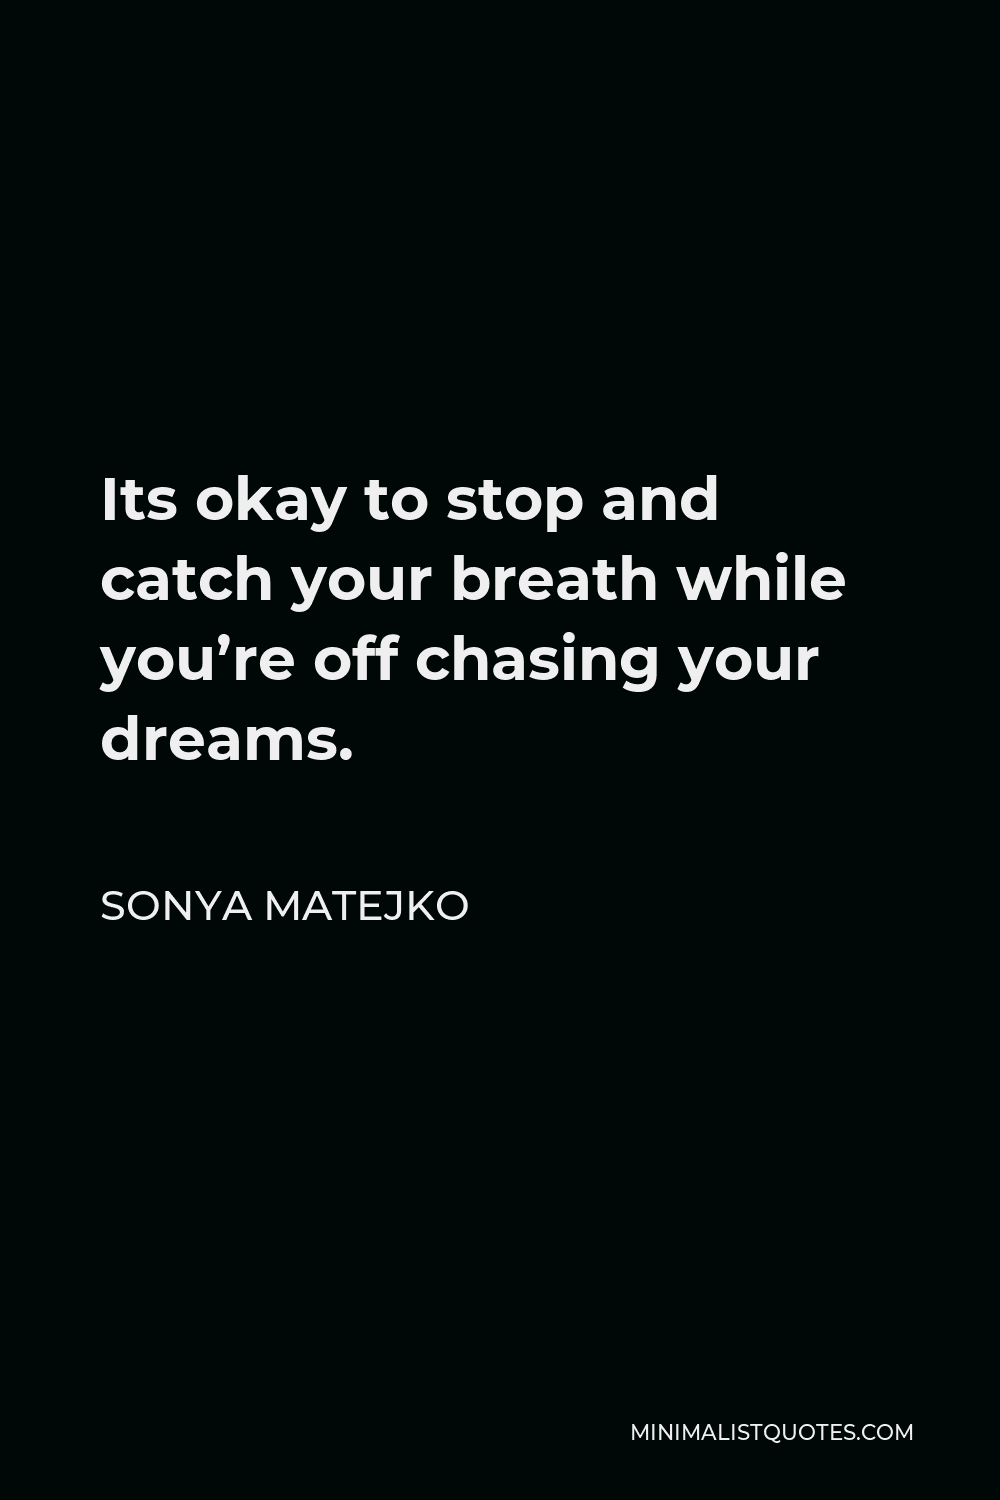 Sonya Matejko Quote - Its okay to stop and catch your breath while you’re off chasing your dreams.